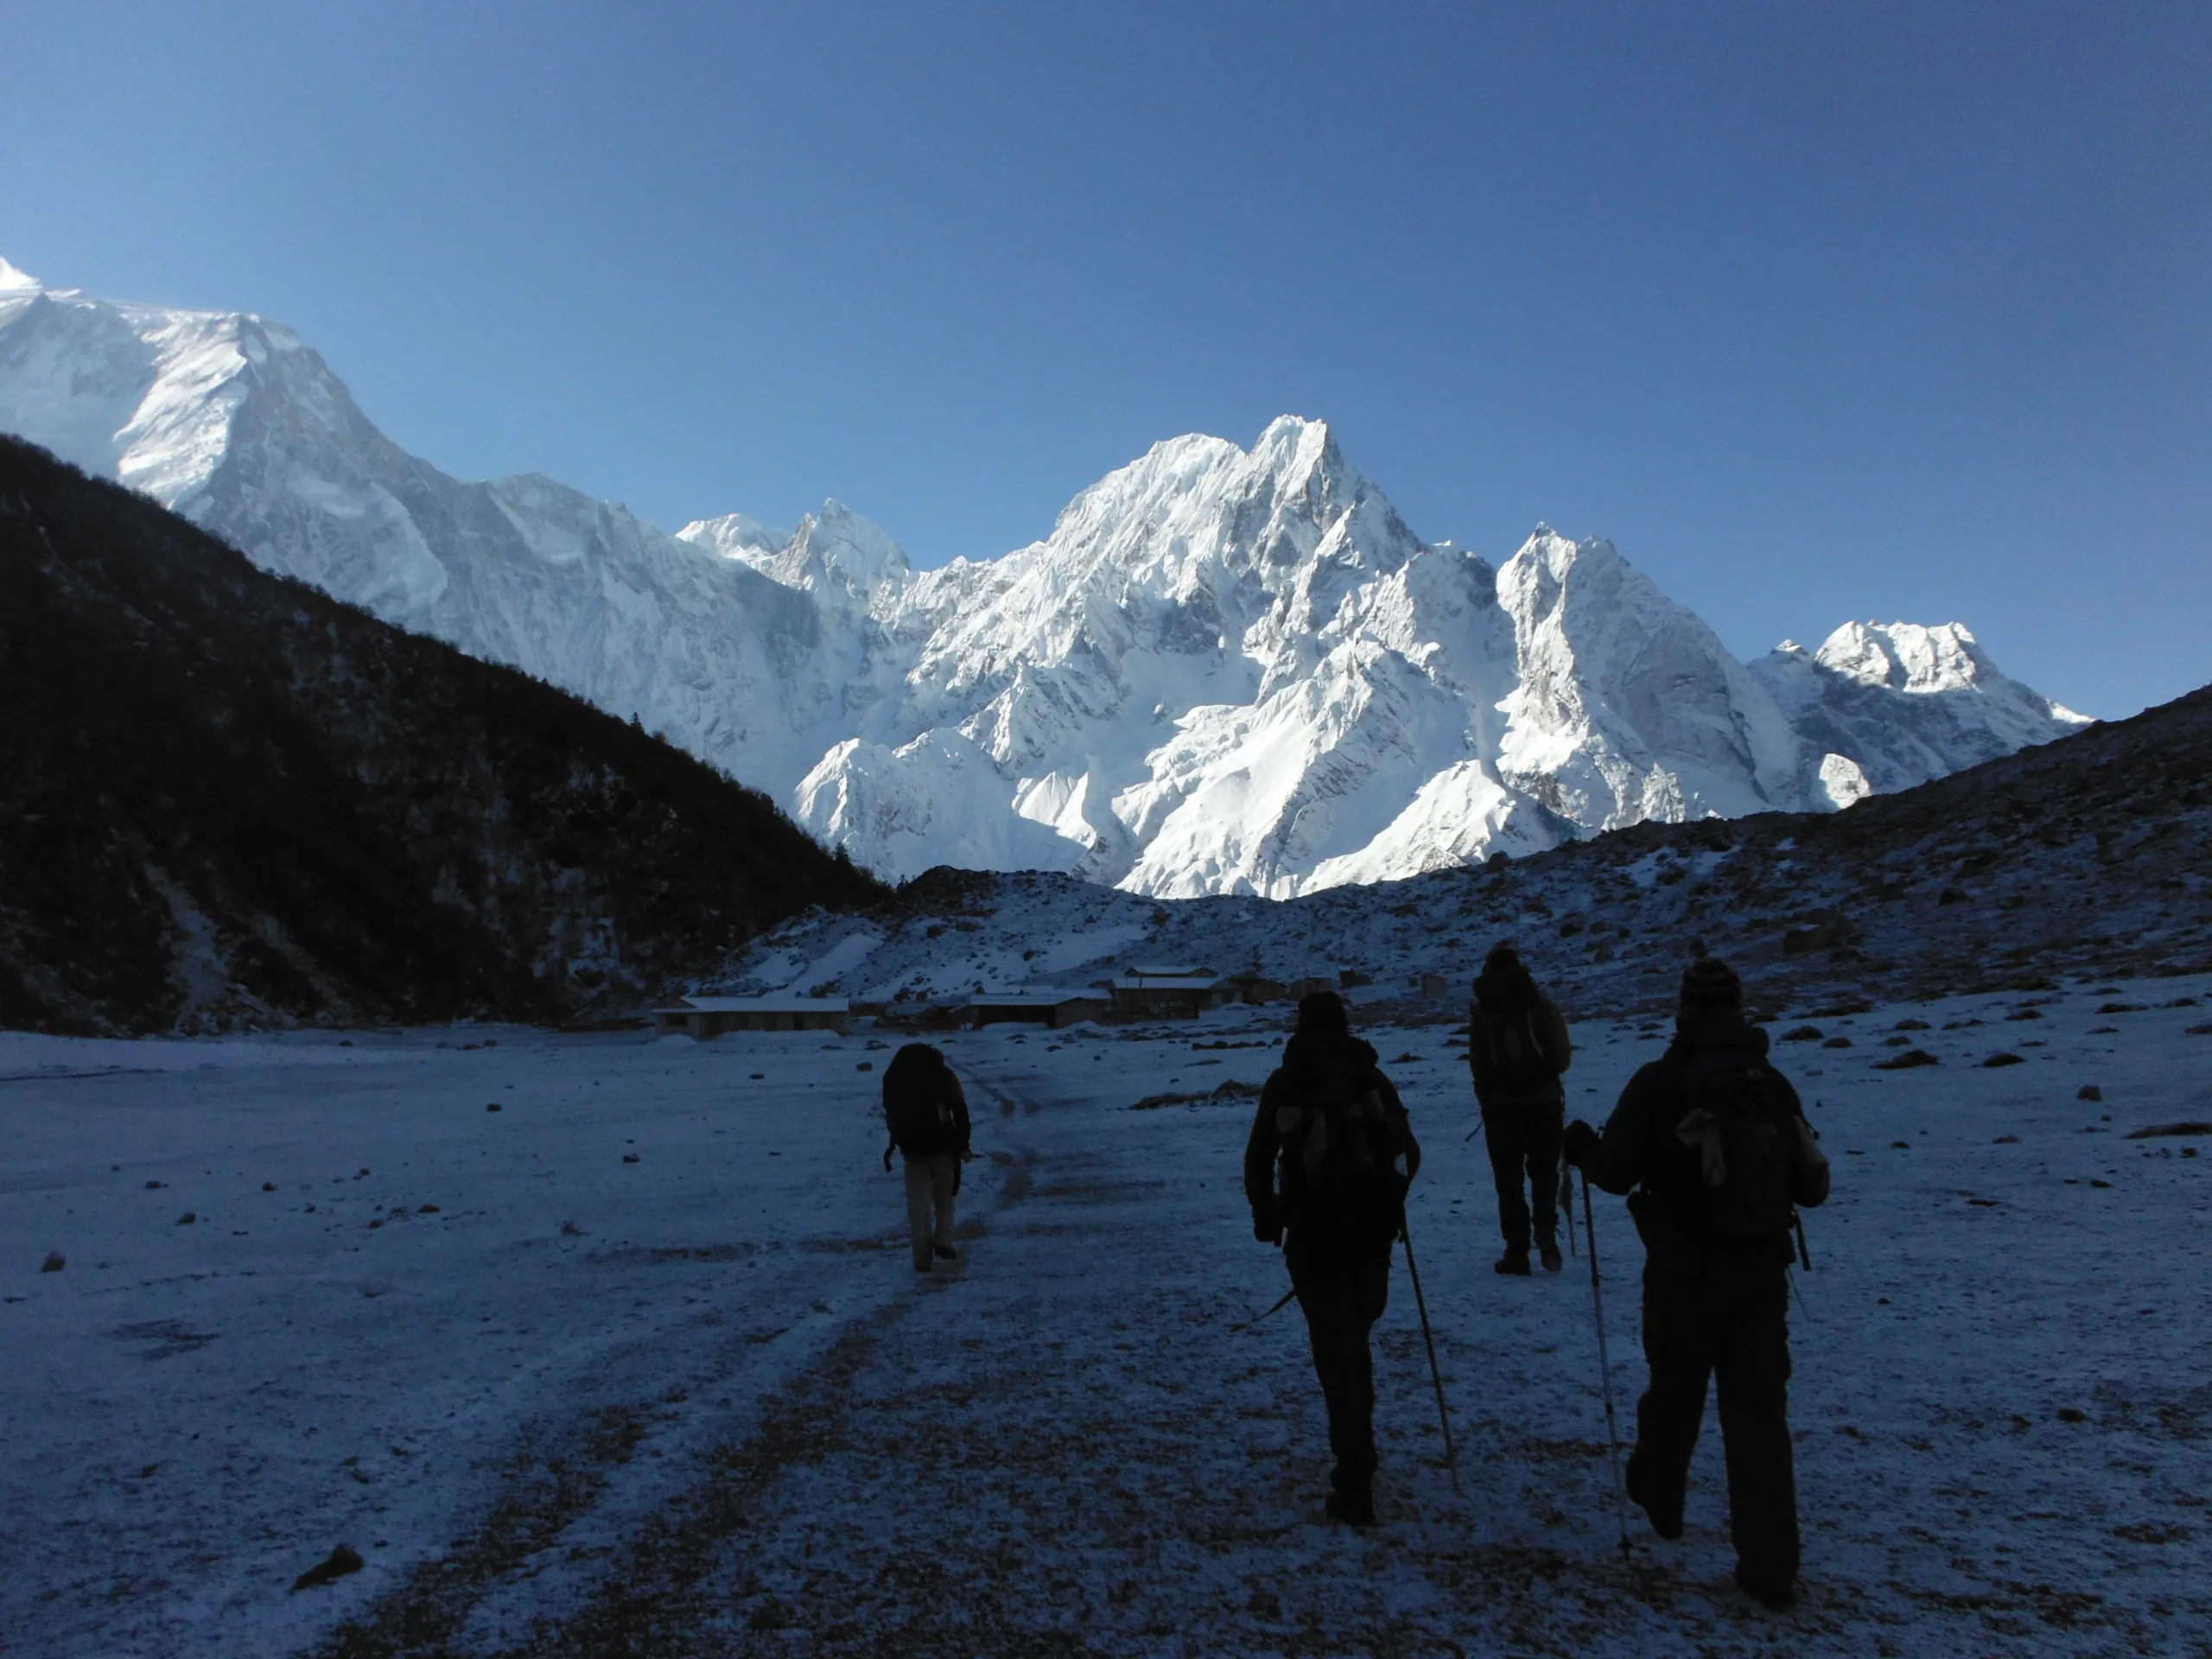 A complete Guide to Manaslu Circuit Trek - Highlights, Cost & Itinerary